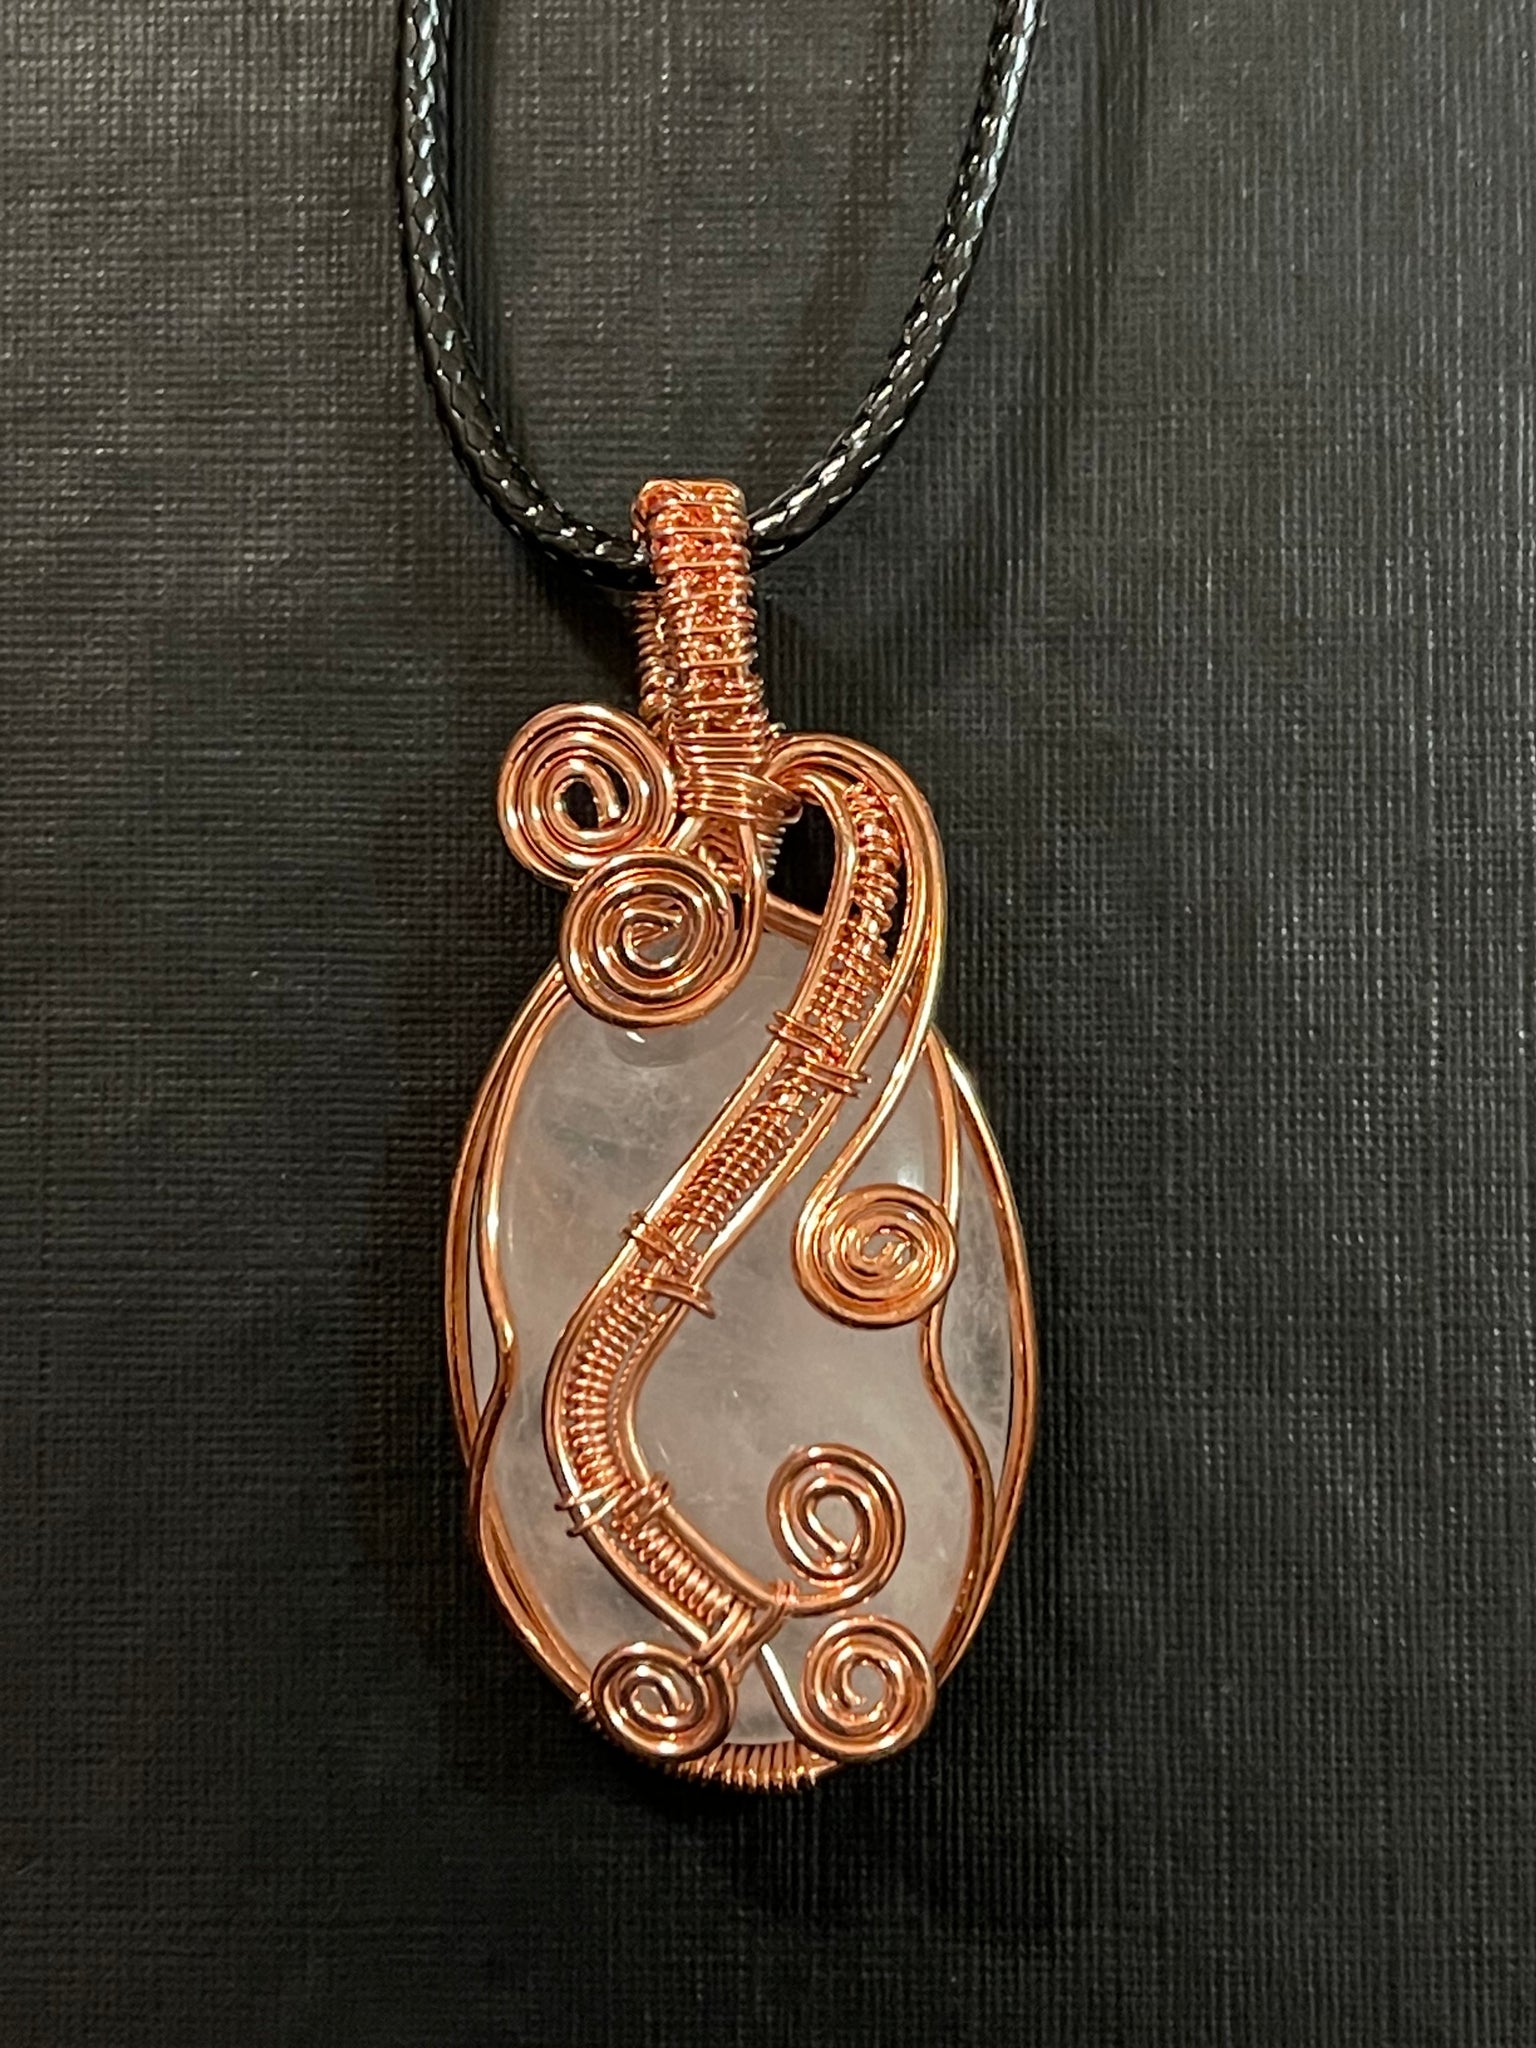 Copper Wrapped Gemstones